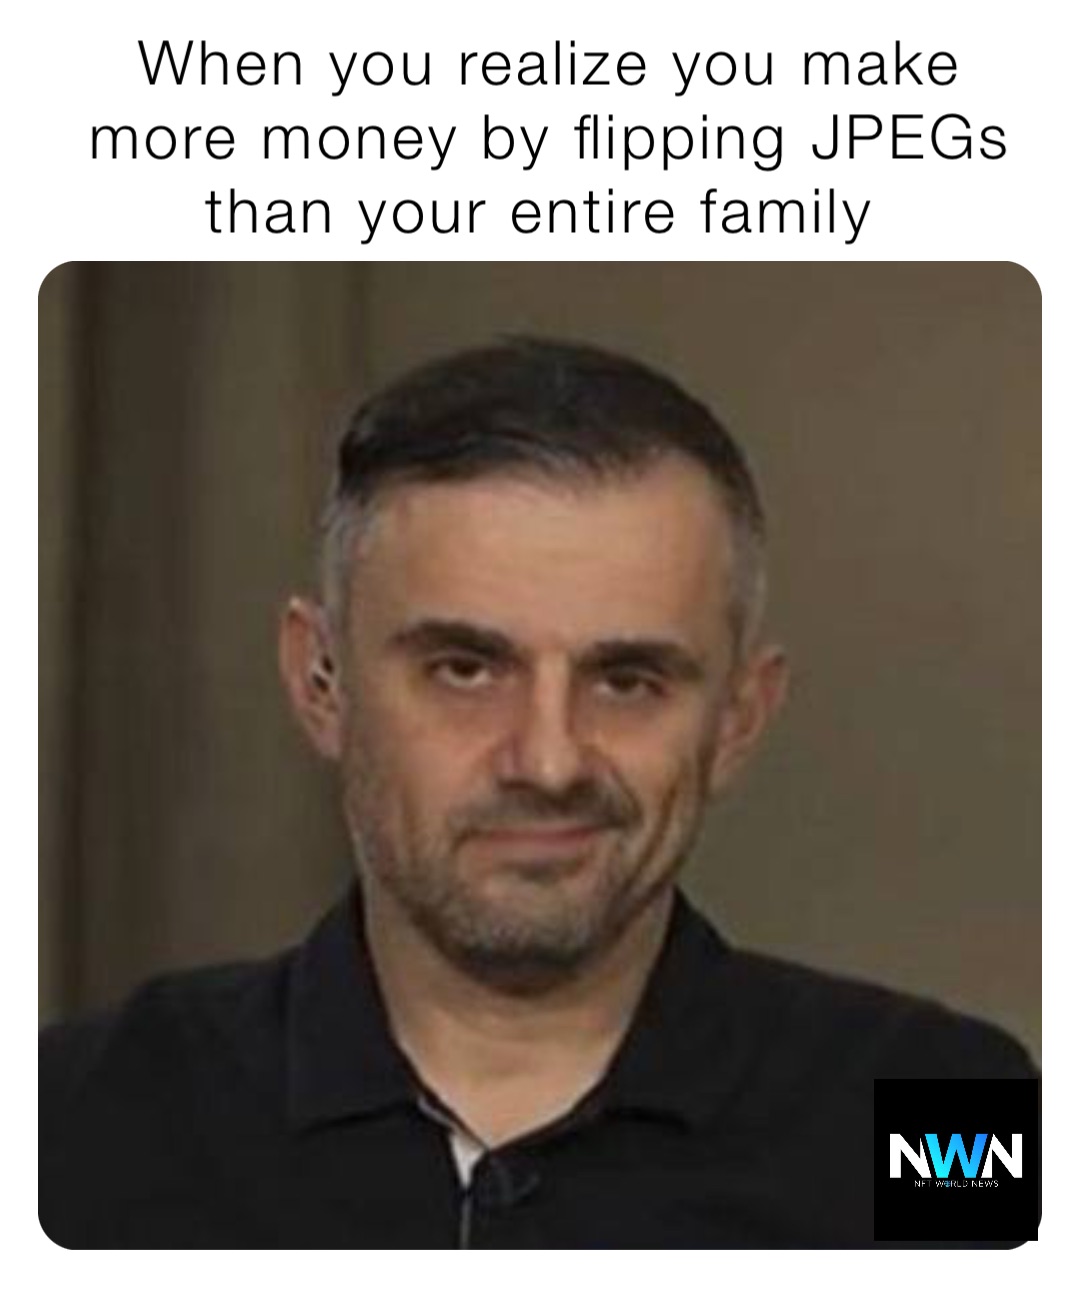 When you realize you make more money by flipping JPEGs than your entire family